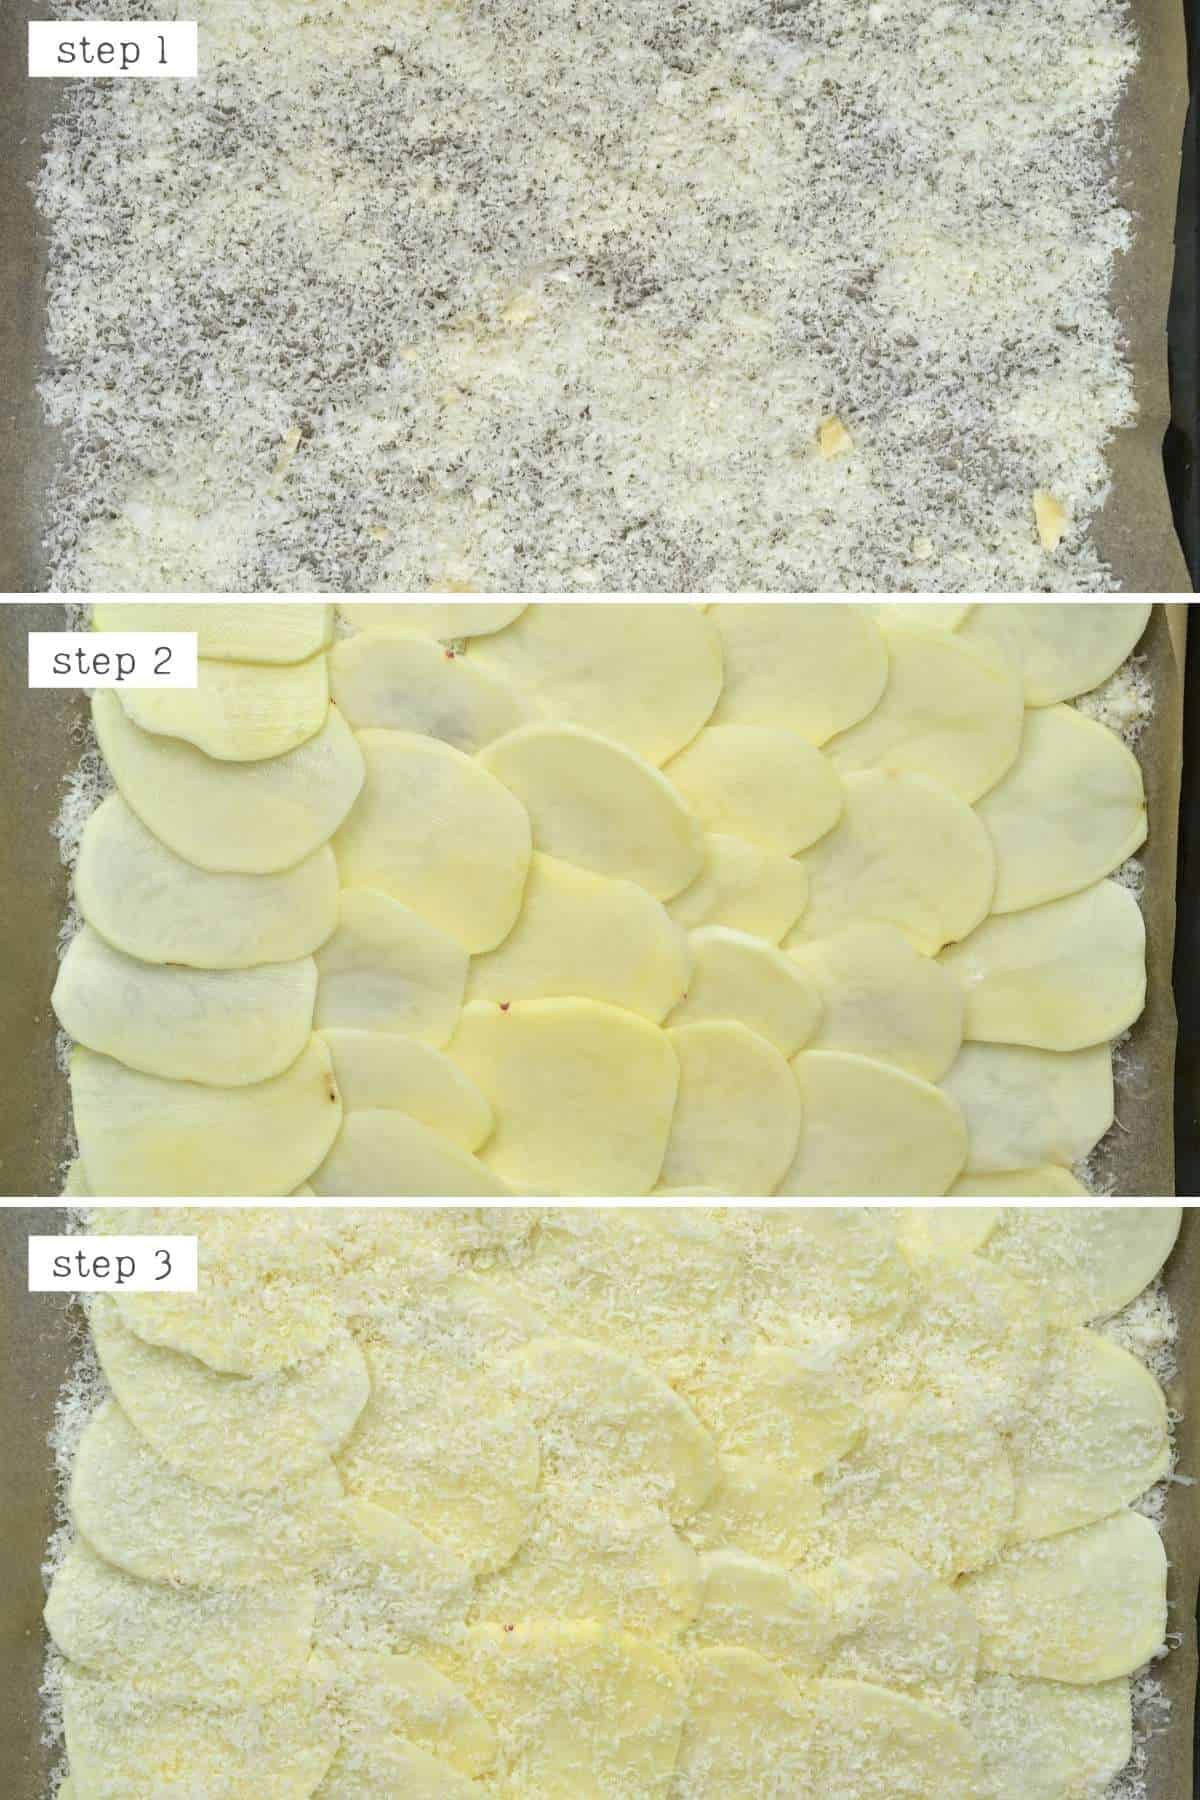 Steps for layering parmesan and potato slices